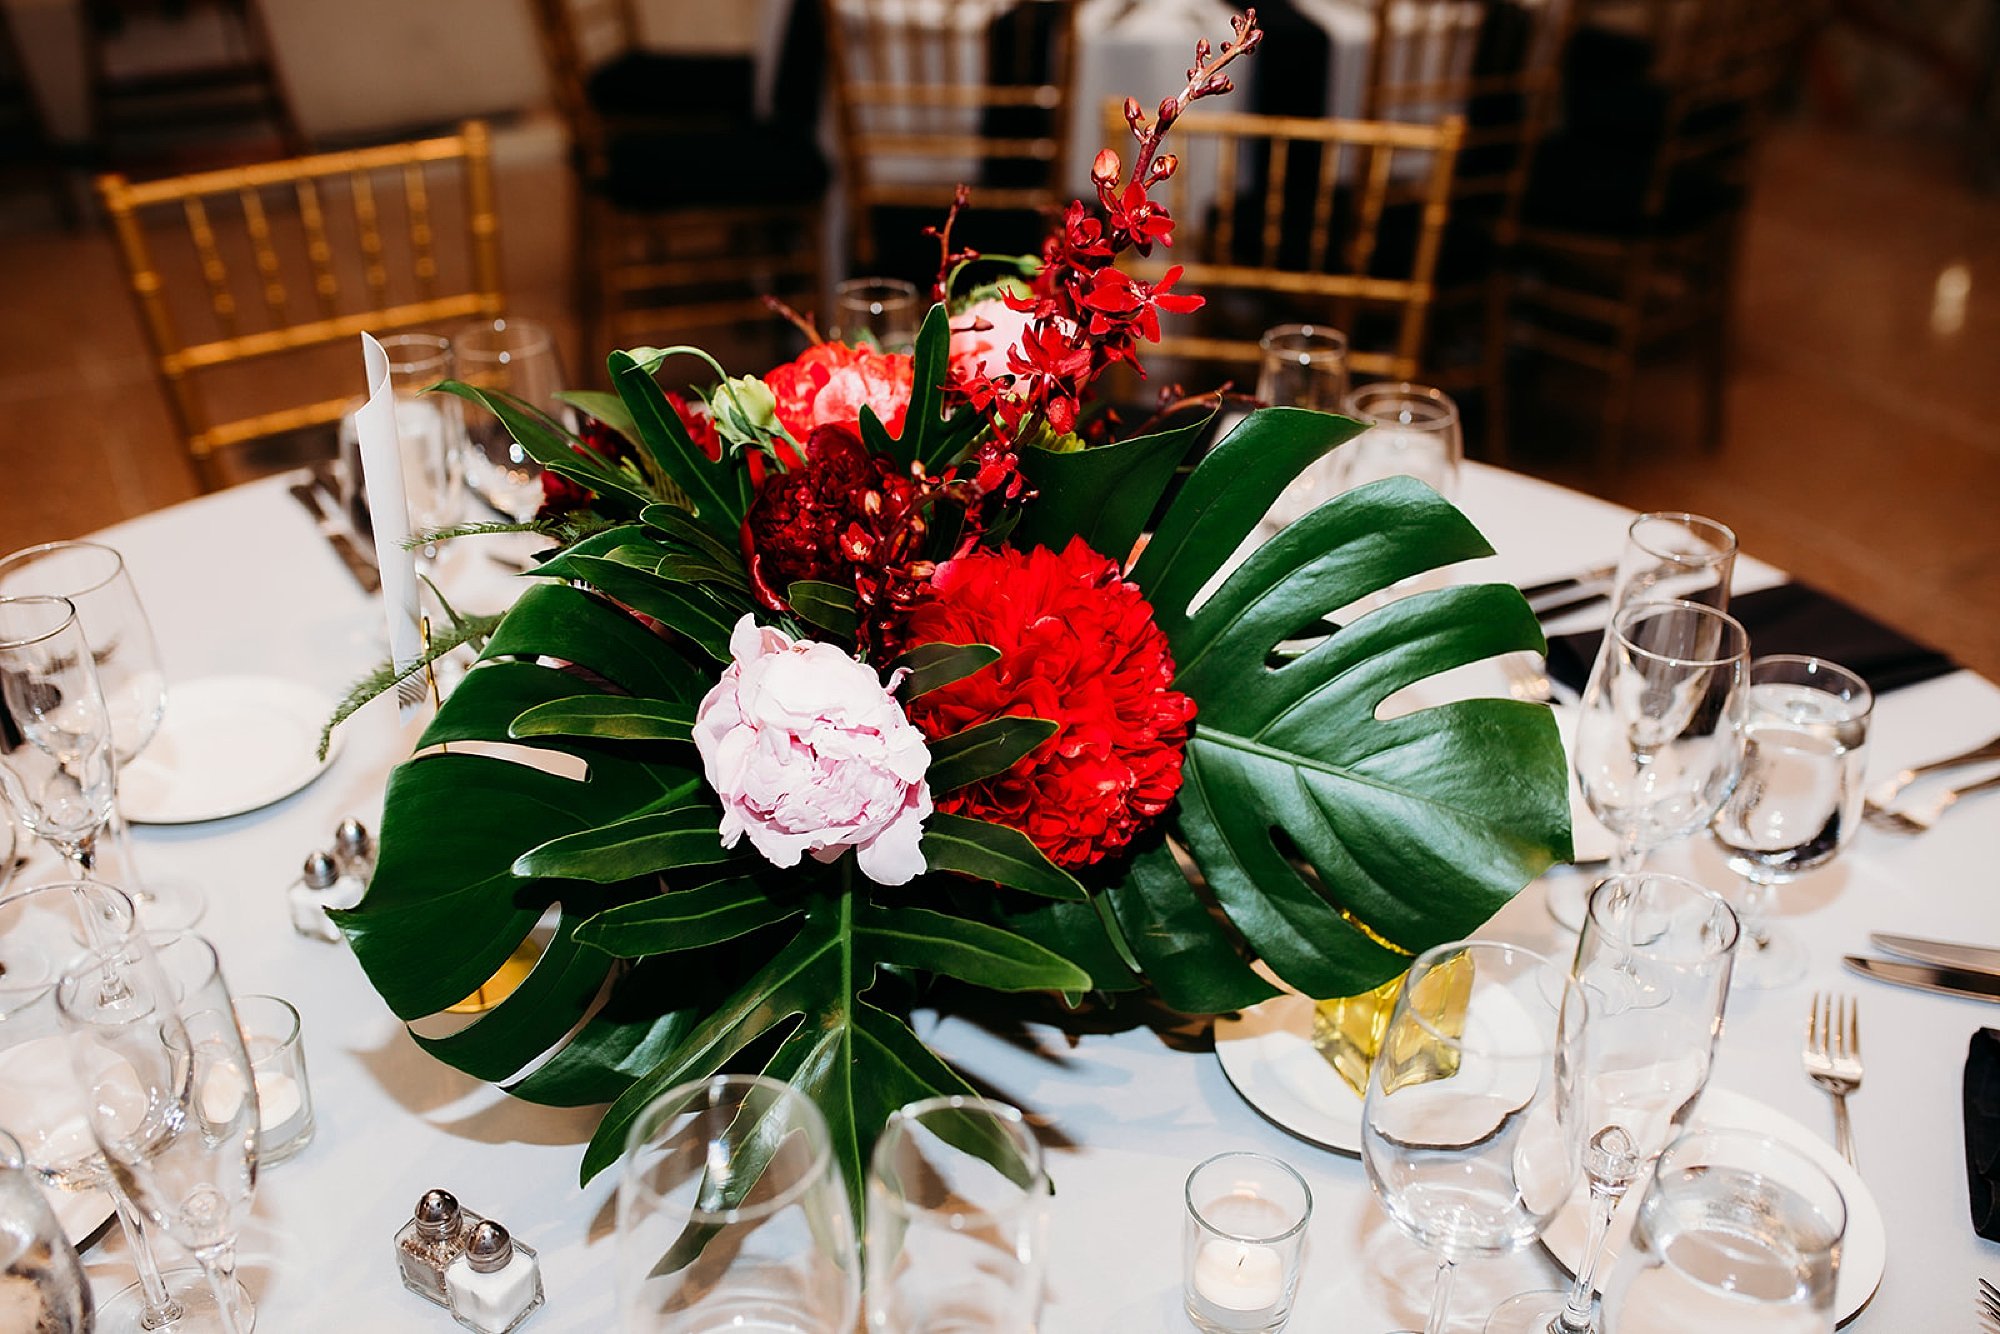 tropical floral centerpieces for The Bronx Zoo wedding reception at the Old Lion House